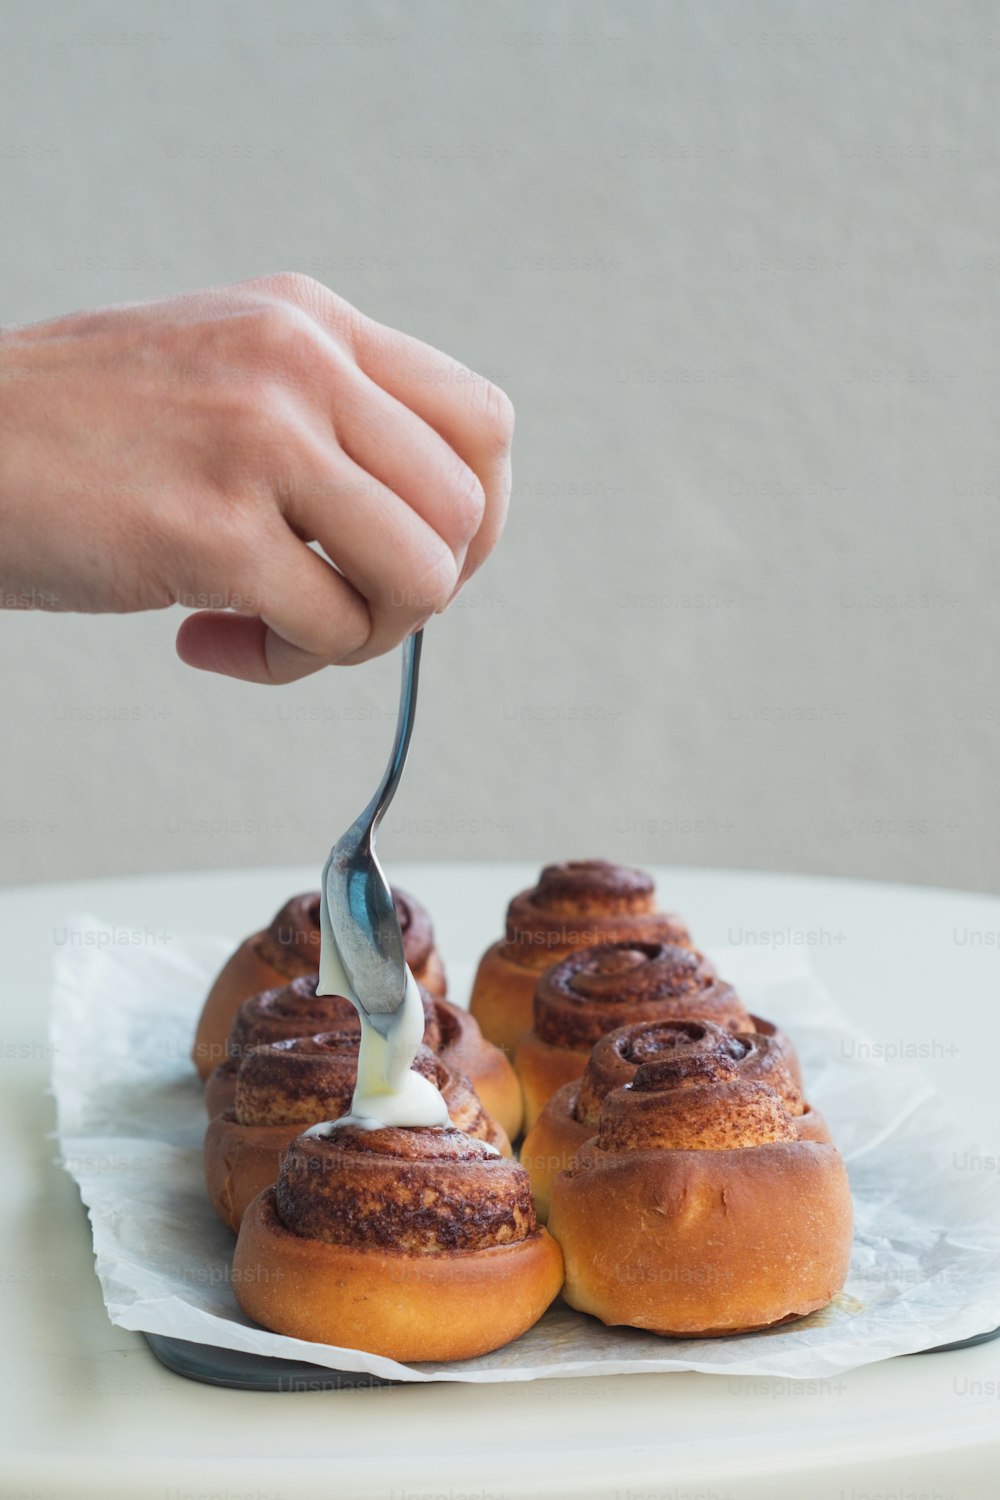 a person is spreading cream on some cinnamon buns